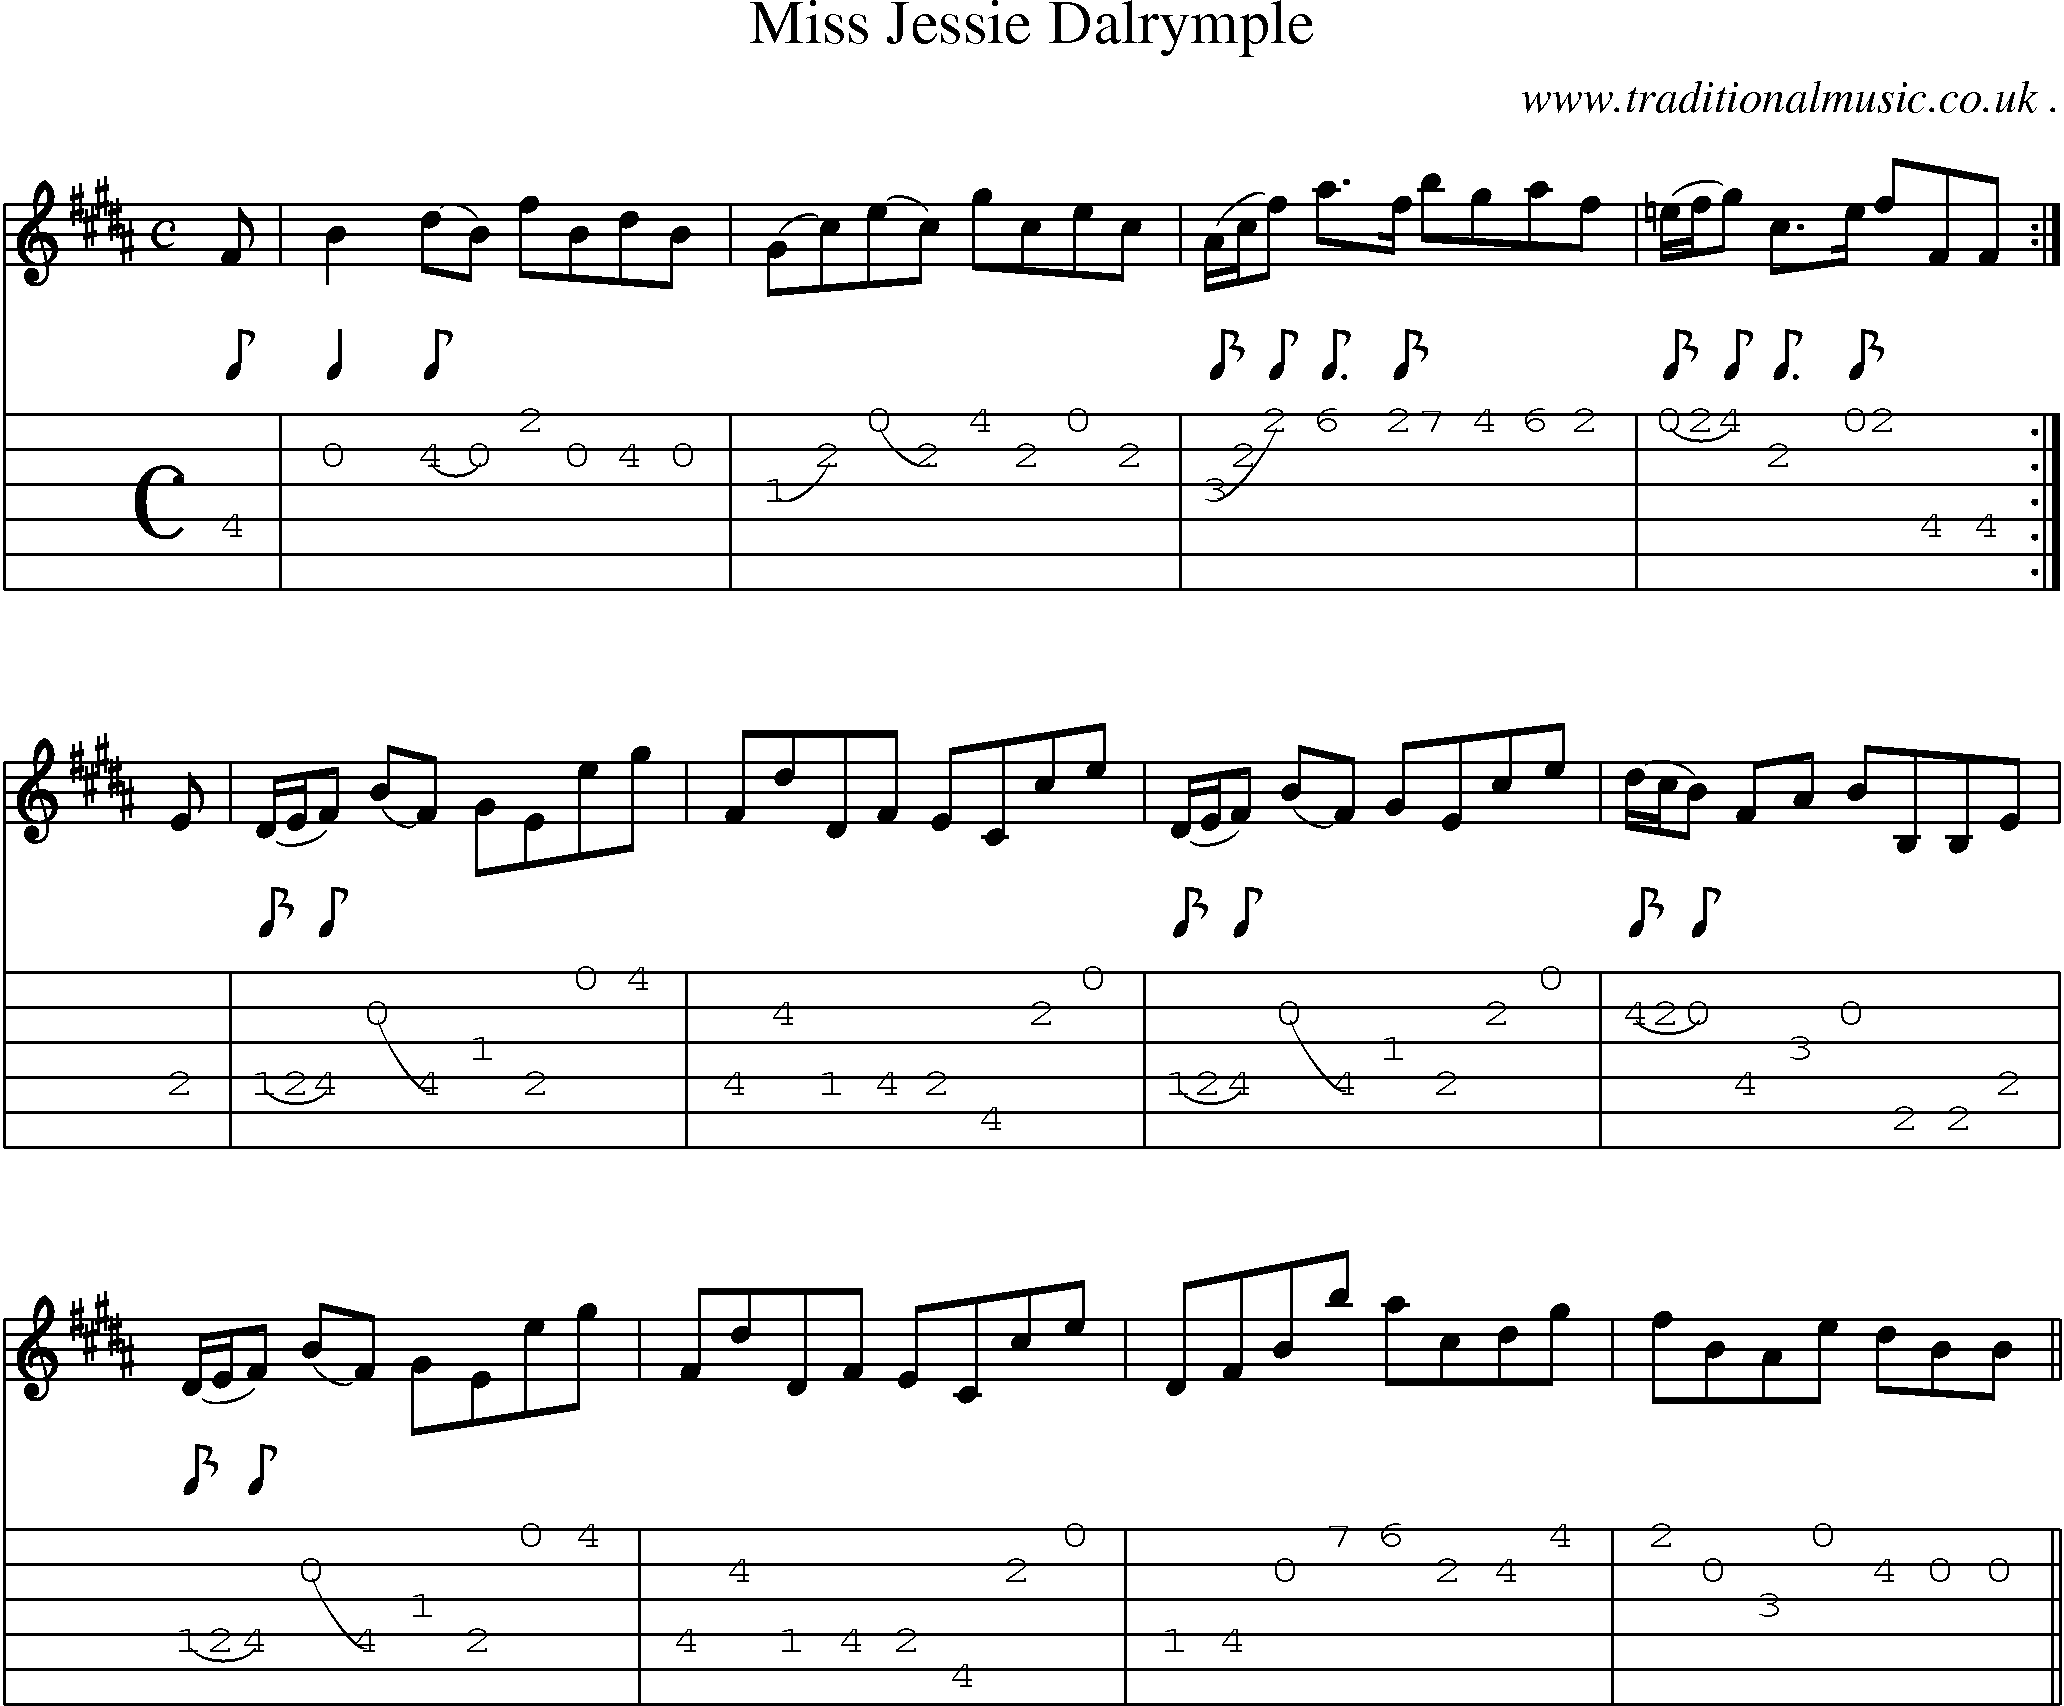 Sheet-music  score, Chords and Guitar Tabs for Miss Jessie Dalrymple